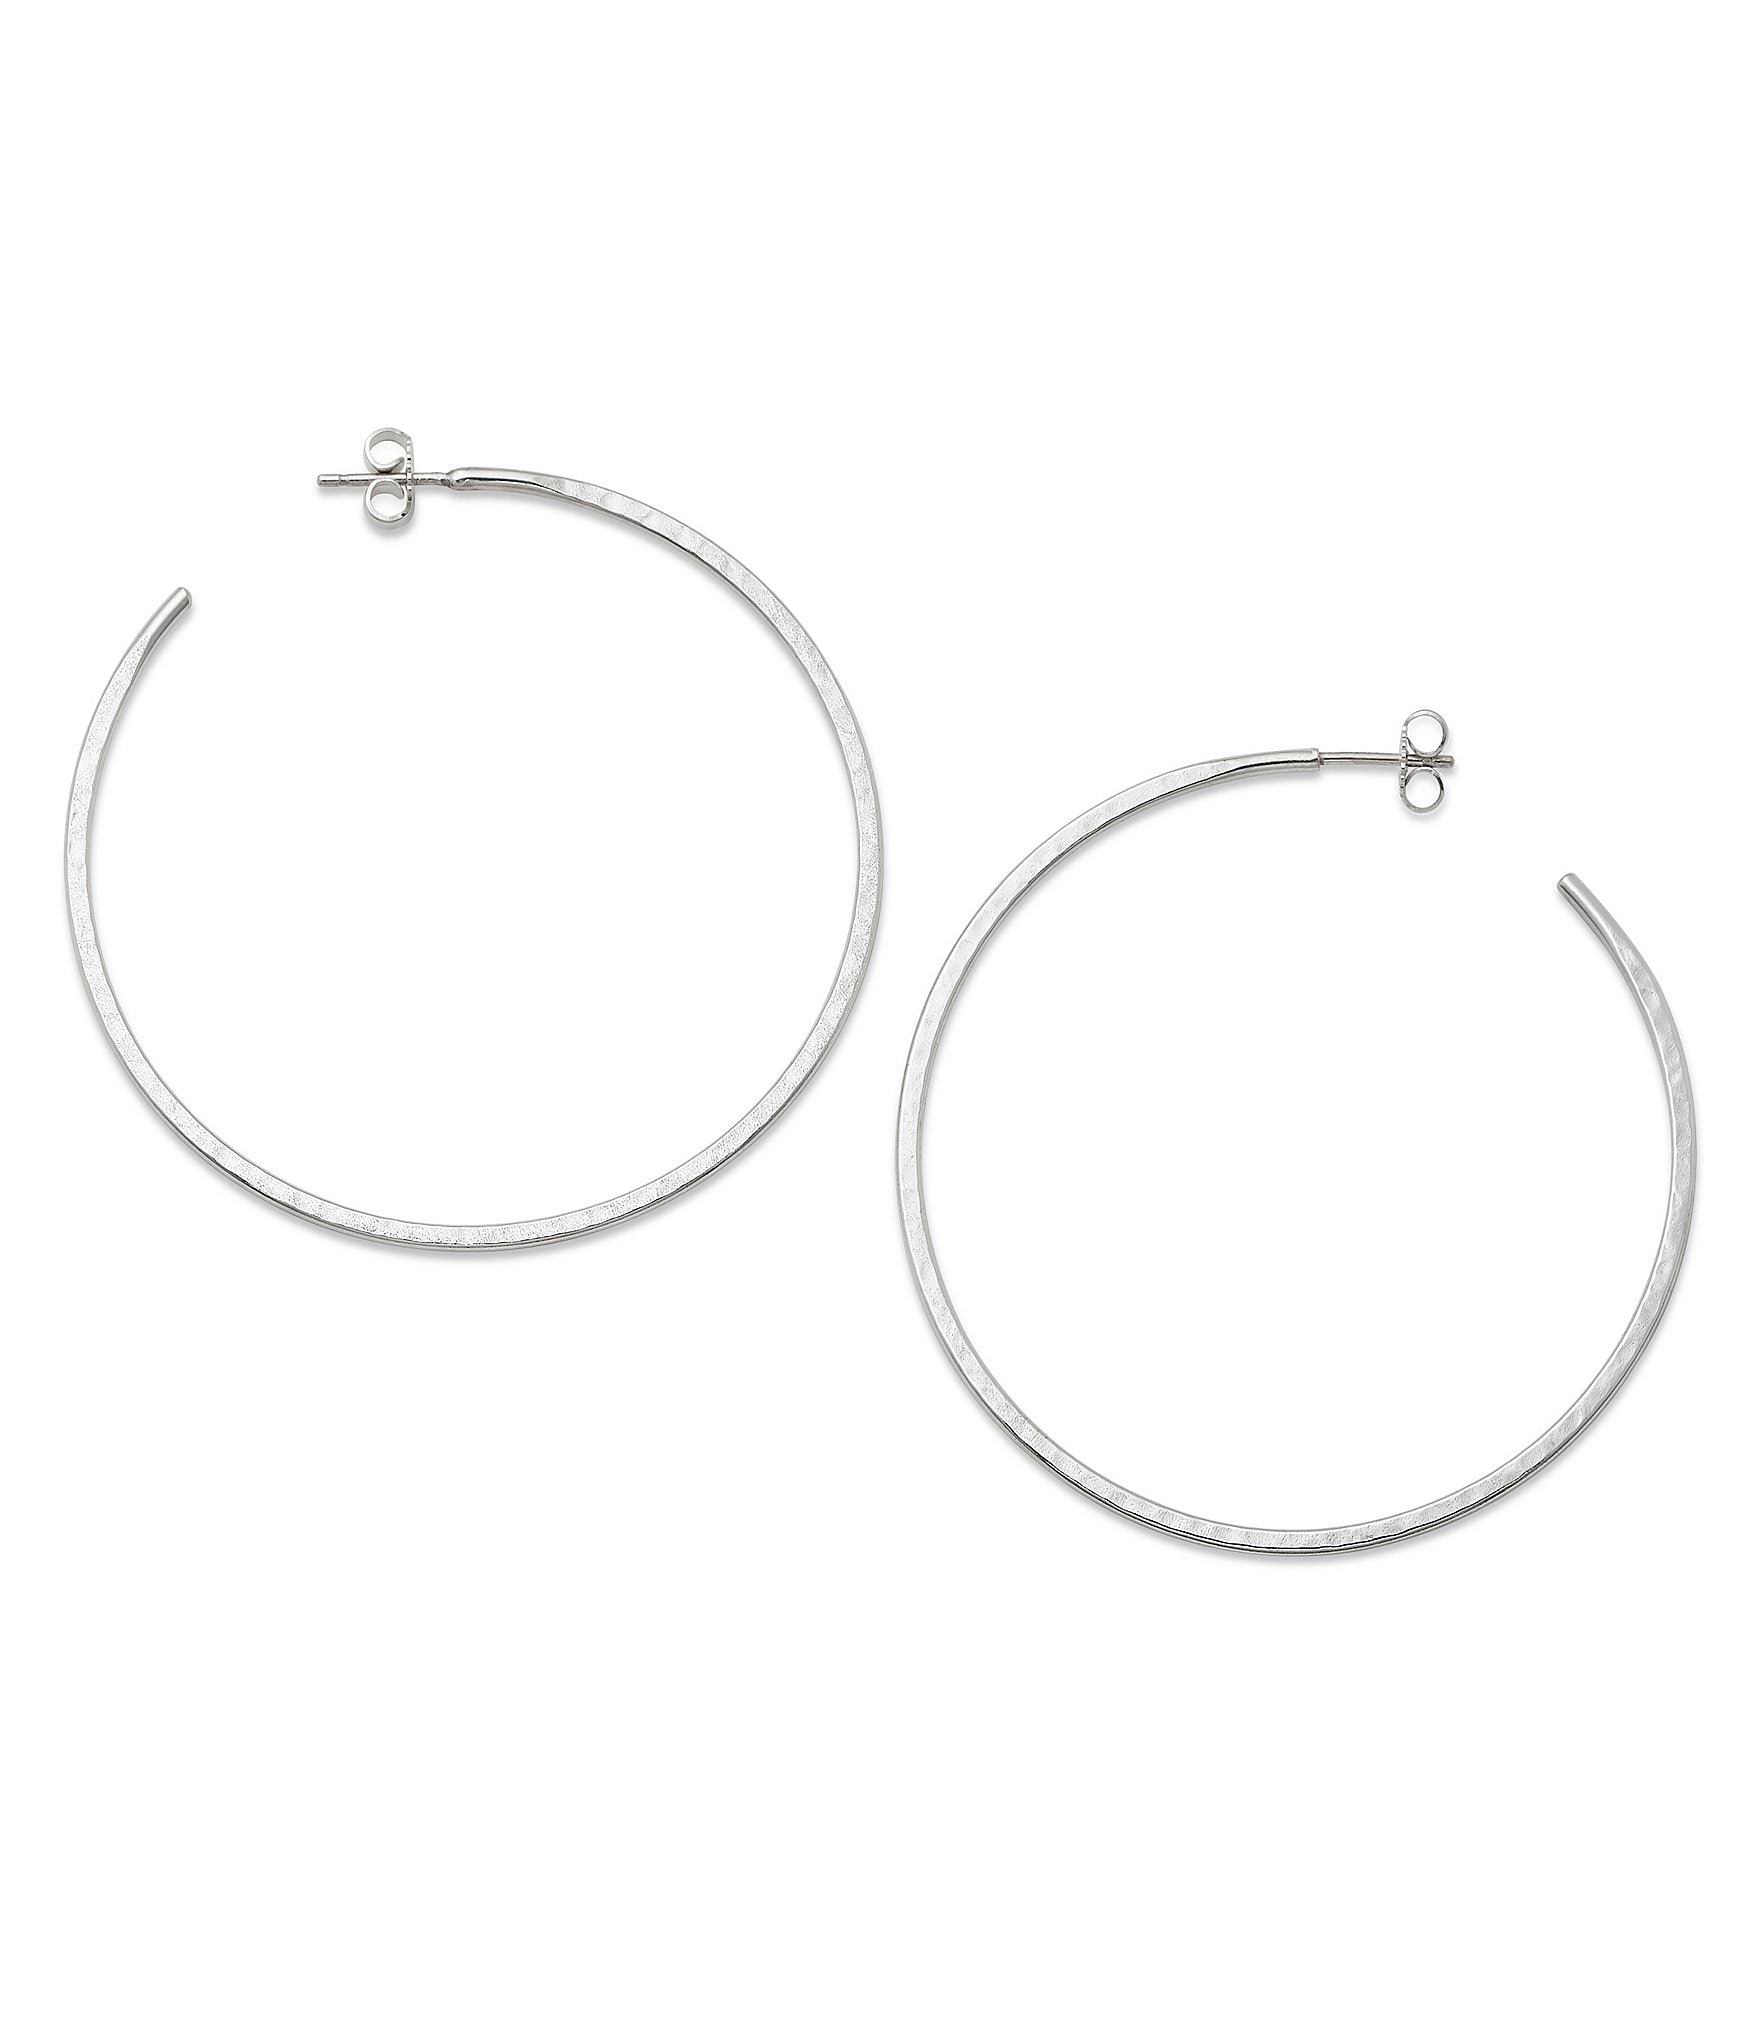 James Avery Classic Sterling Silver Hammered Hoop Earrings Extra Large   Dillards